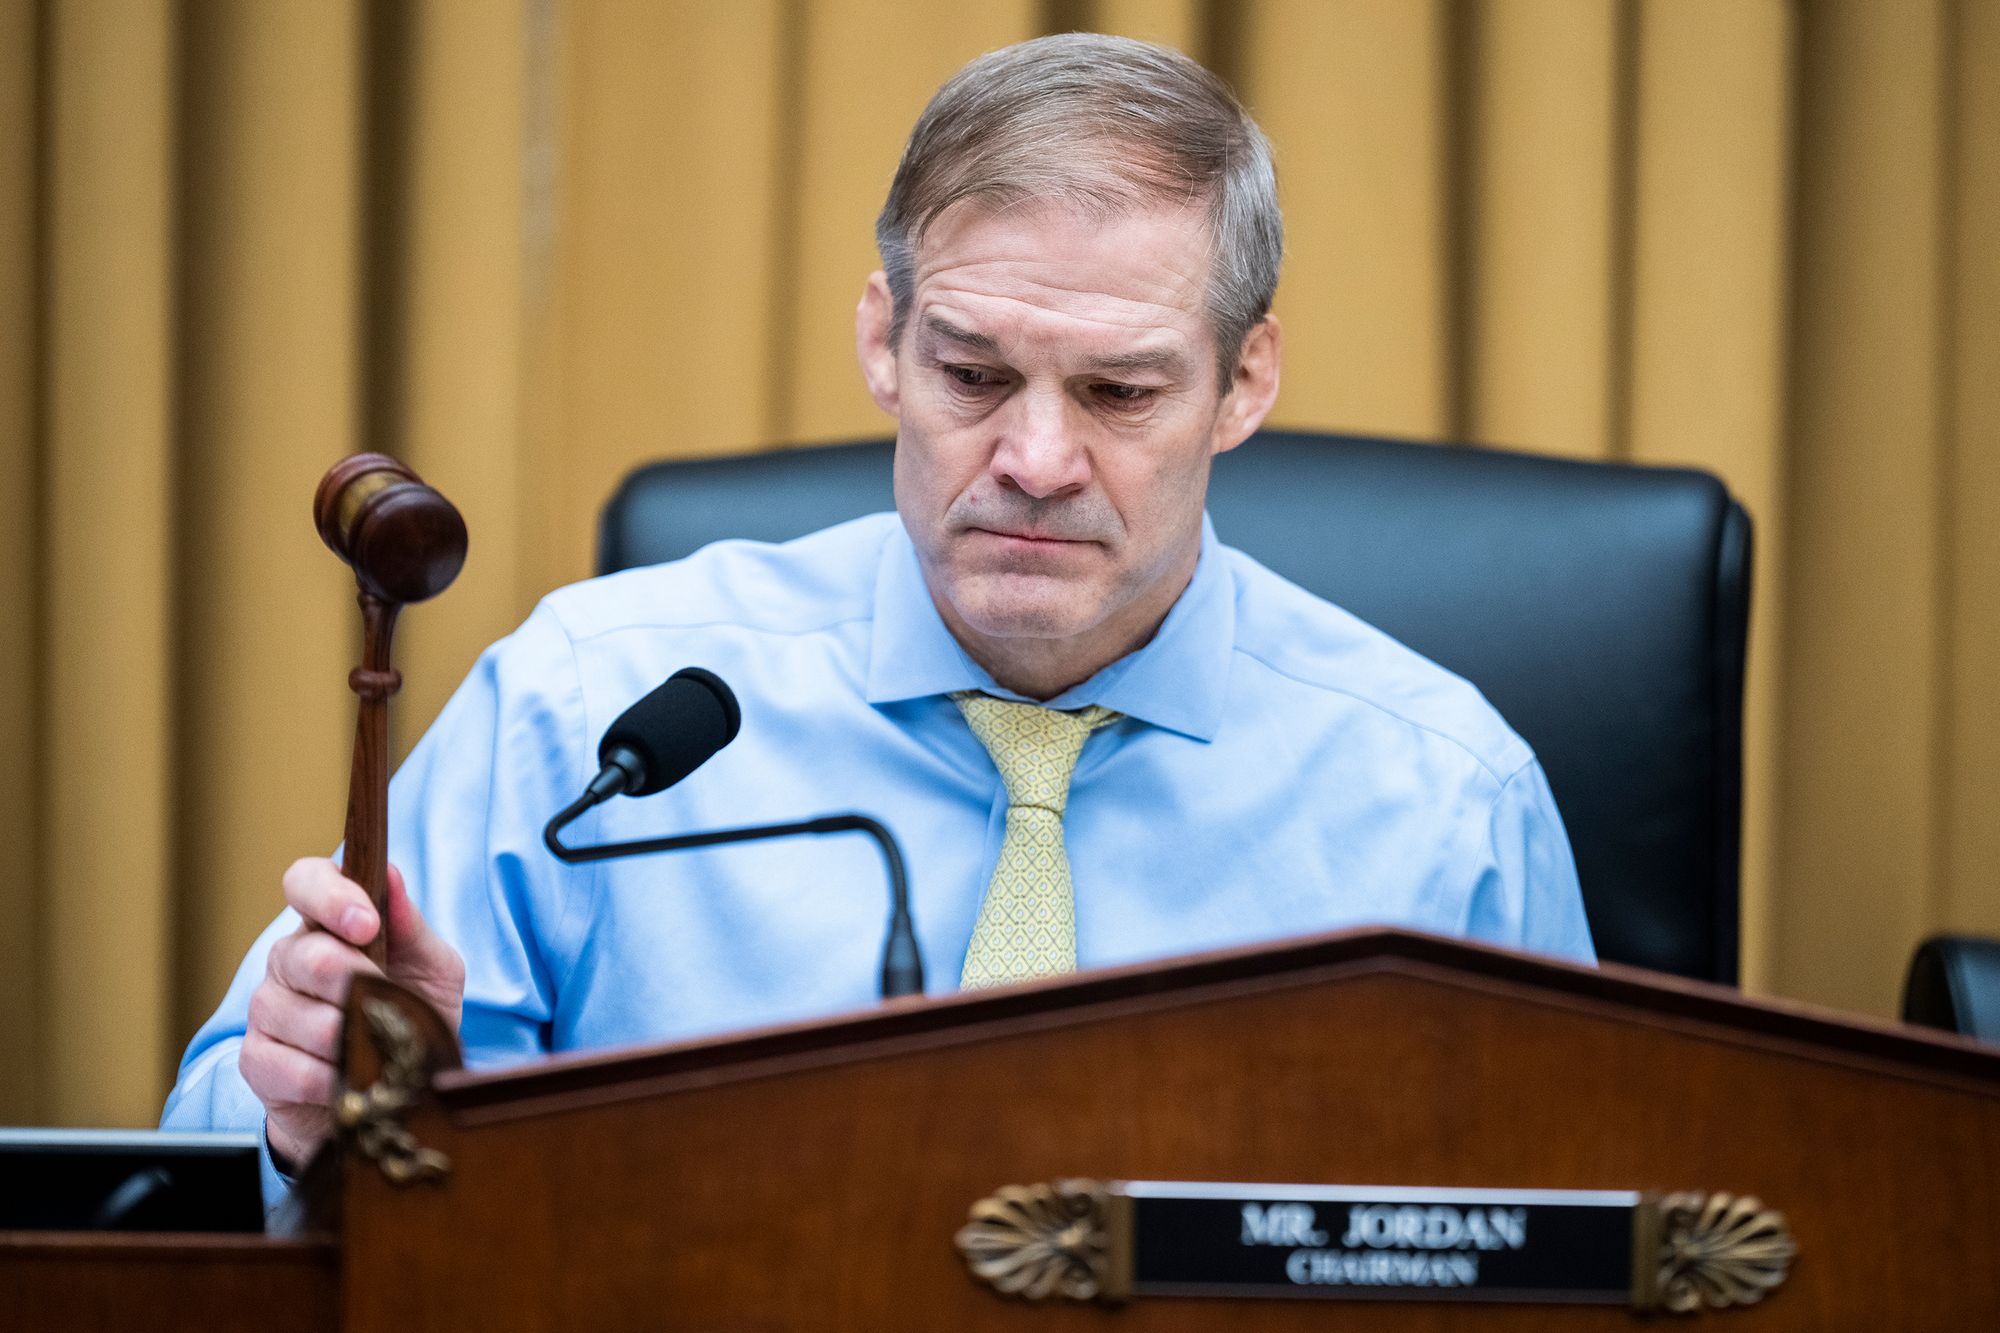 Republican Rep. Jim Jordan Issues Sweeping Information Requests to Universities Researching Disinformation (propublica.org)